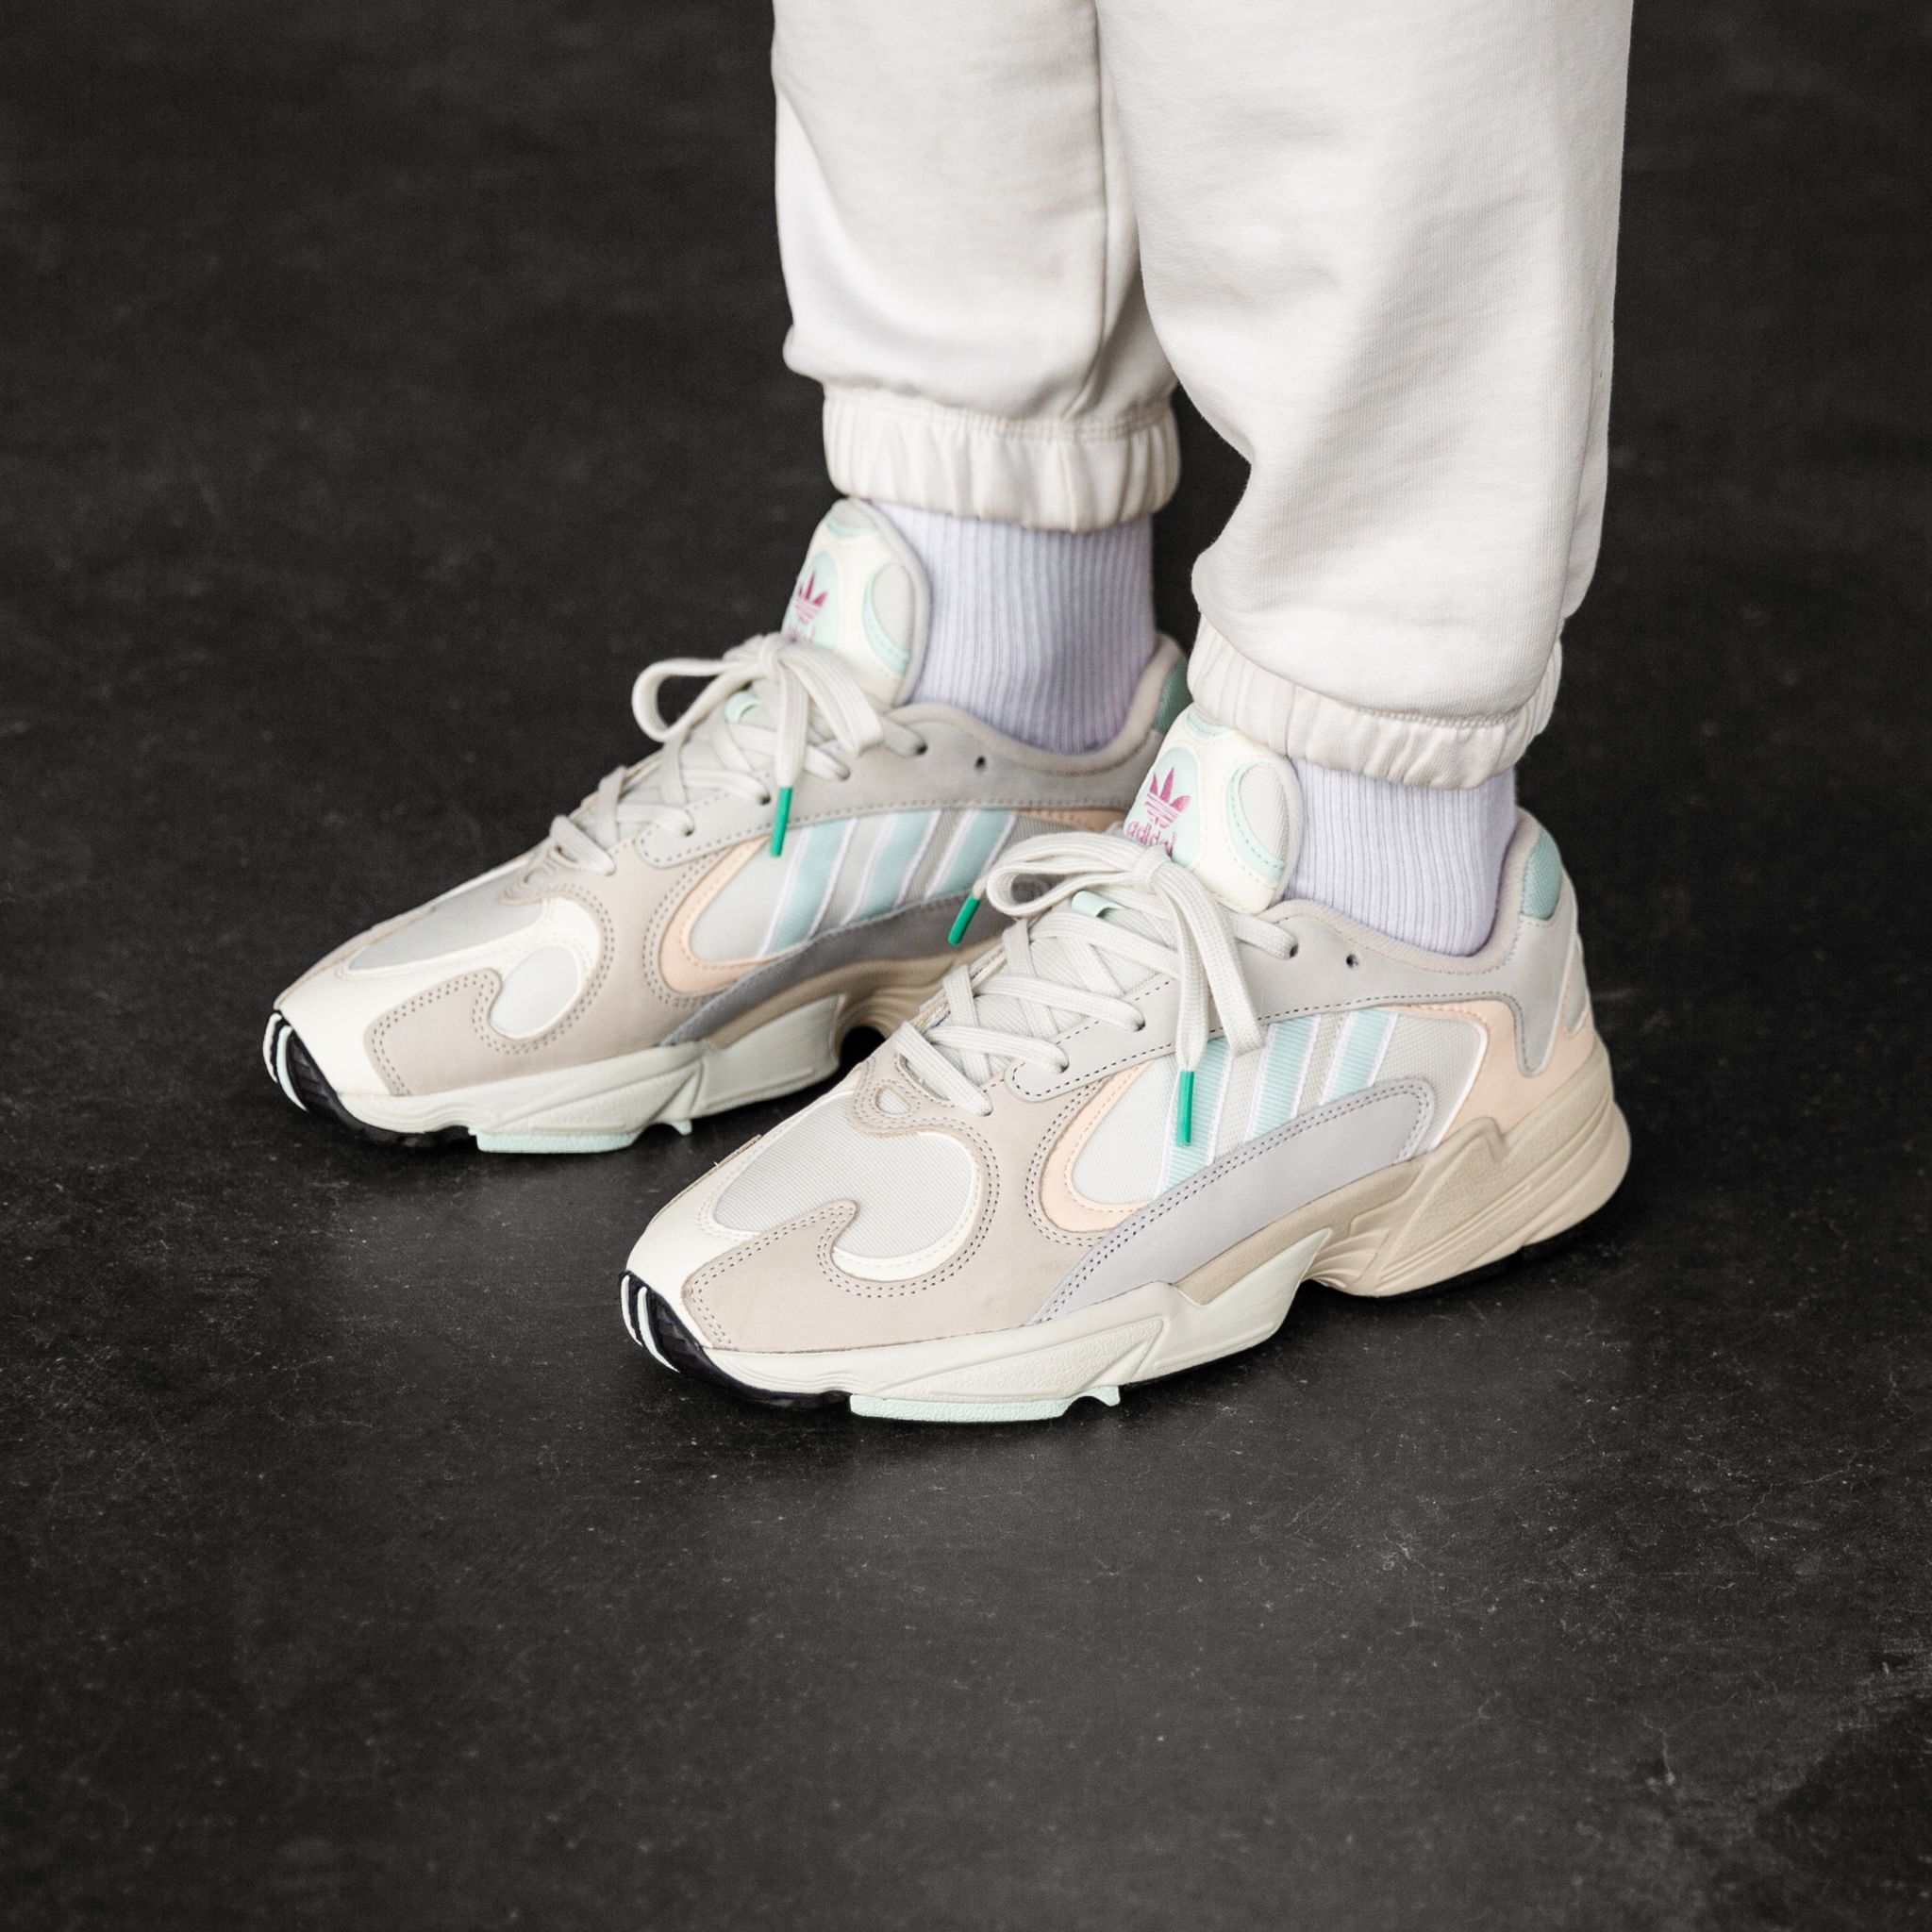 Titolo on "NEW ! Adidas Yung-1 - Off White/Ice Mint/Ecrtin HERE: https://t.co/FHEqmkkXKc https://t.co/hxbksmSmwV" Twitter